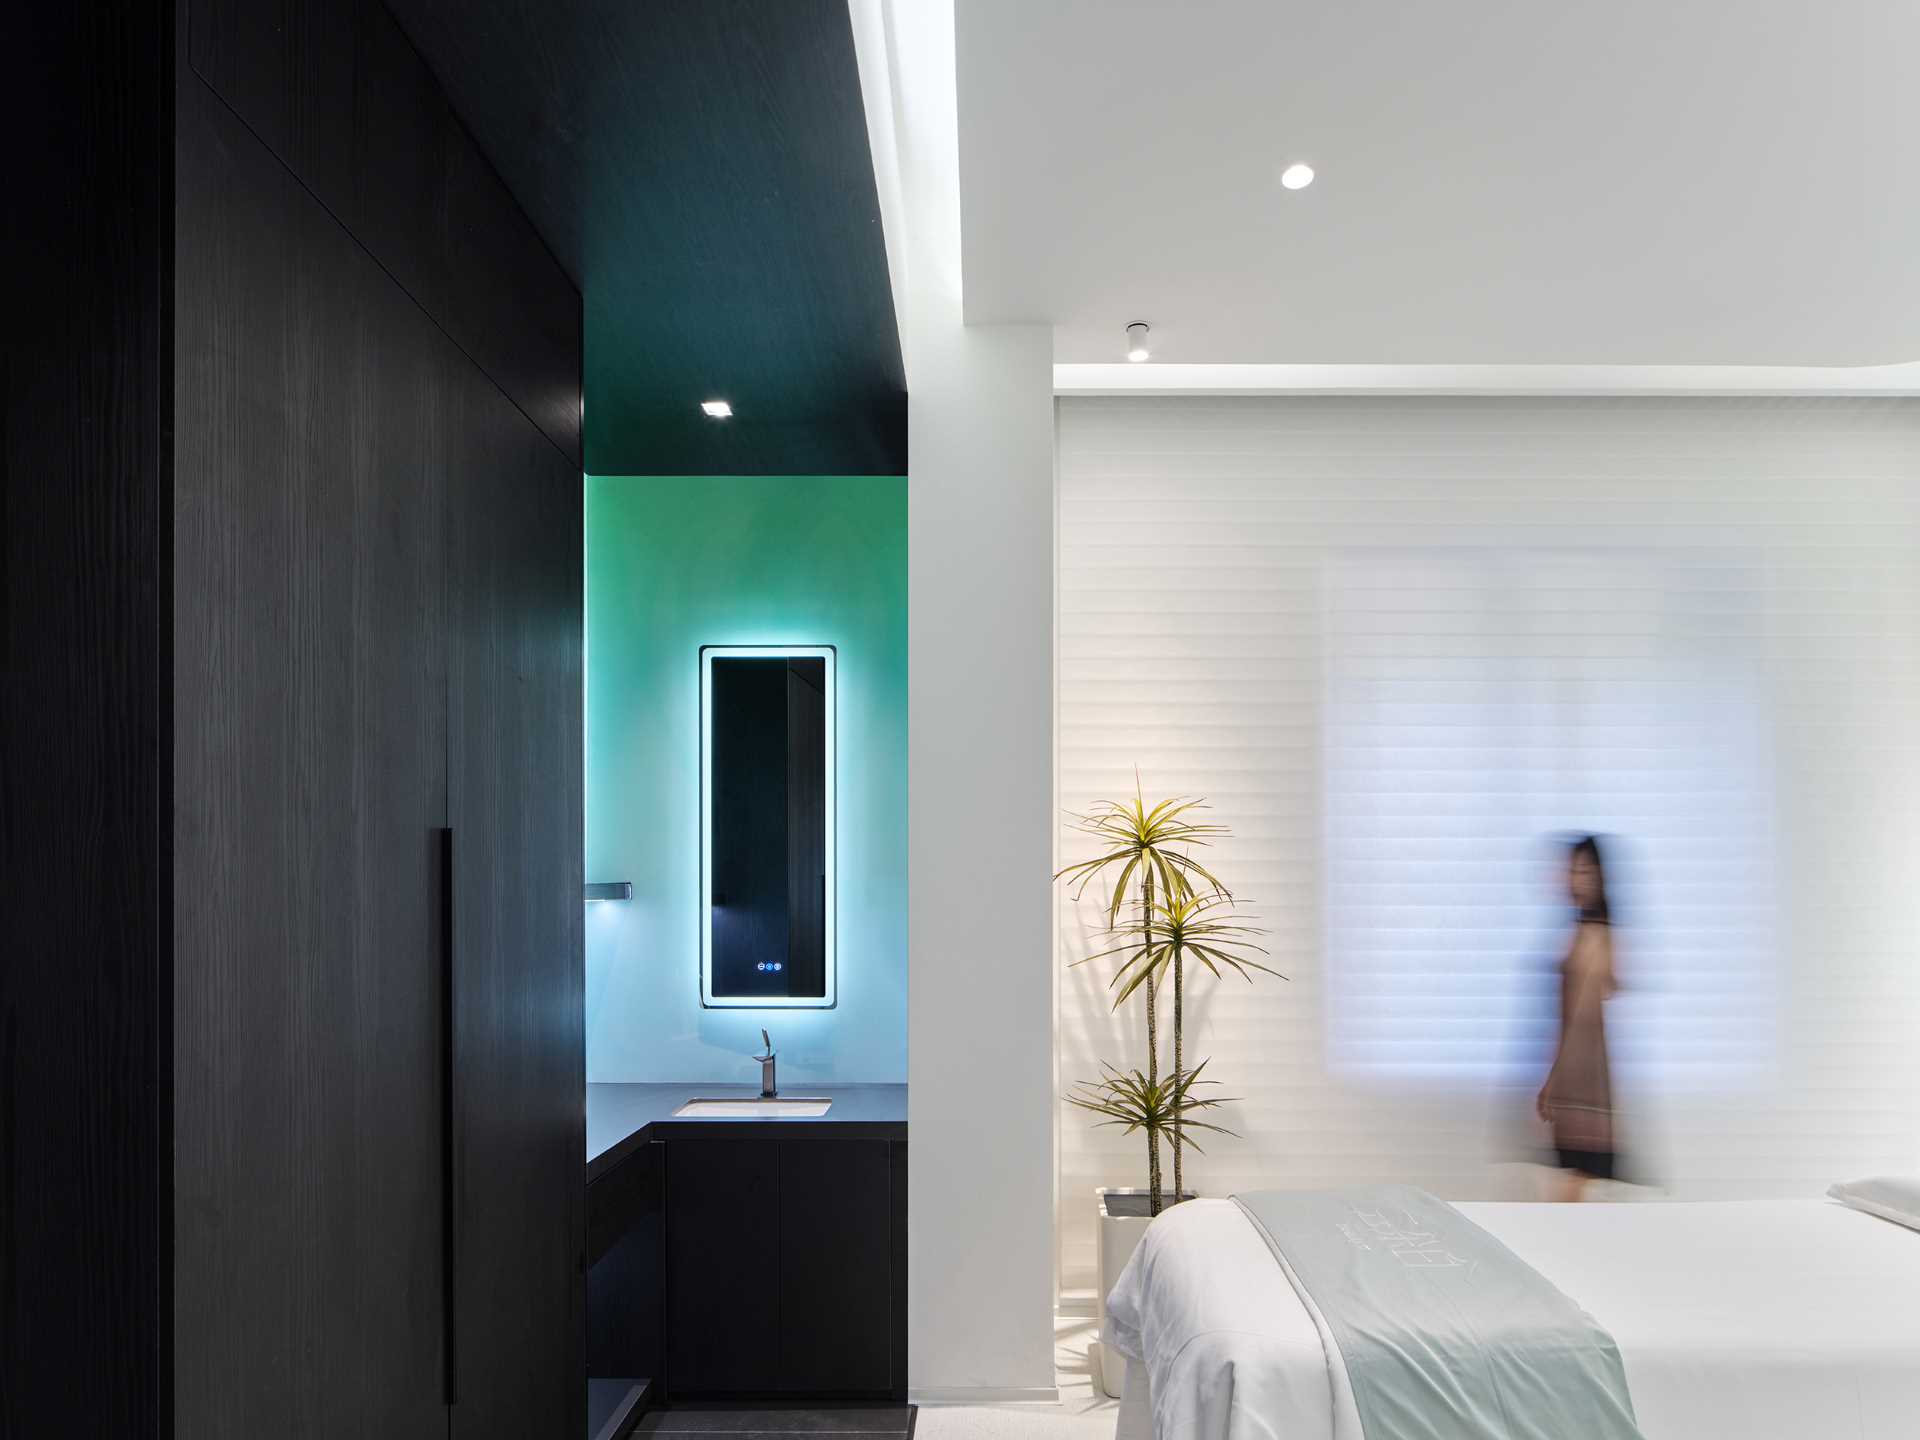 In the treatment rooms, the designers use uses color and material to strengthen the functional zoning and increase the layout of the room visually, as seen in the dual-bed treatment room.